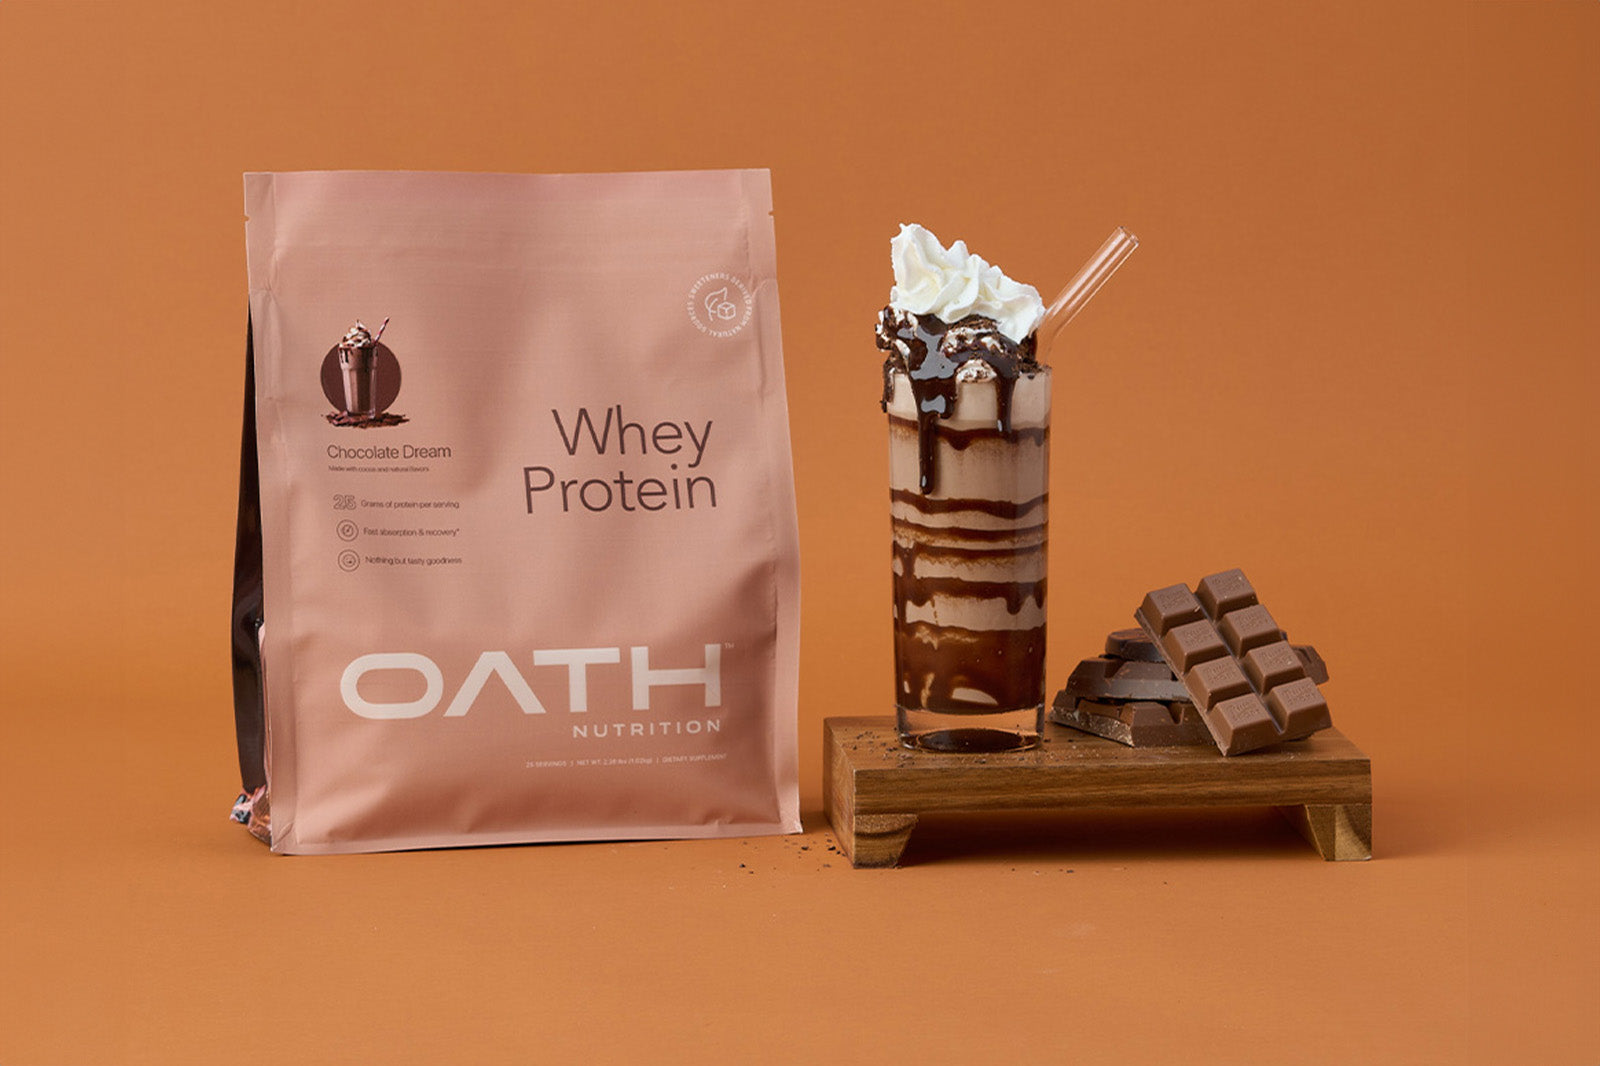 Oath Chocolate Dream Naturally Sweetened whey protein next to a delicious chocolate protein milkshake and chocolate.